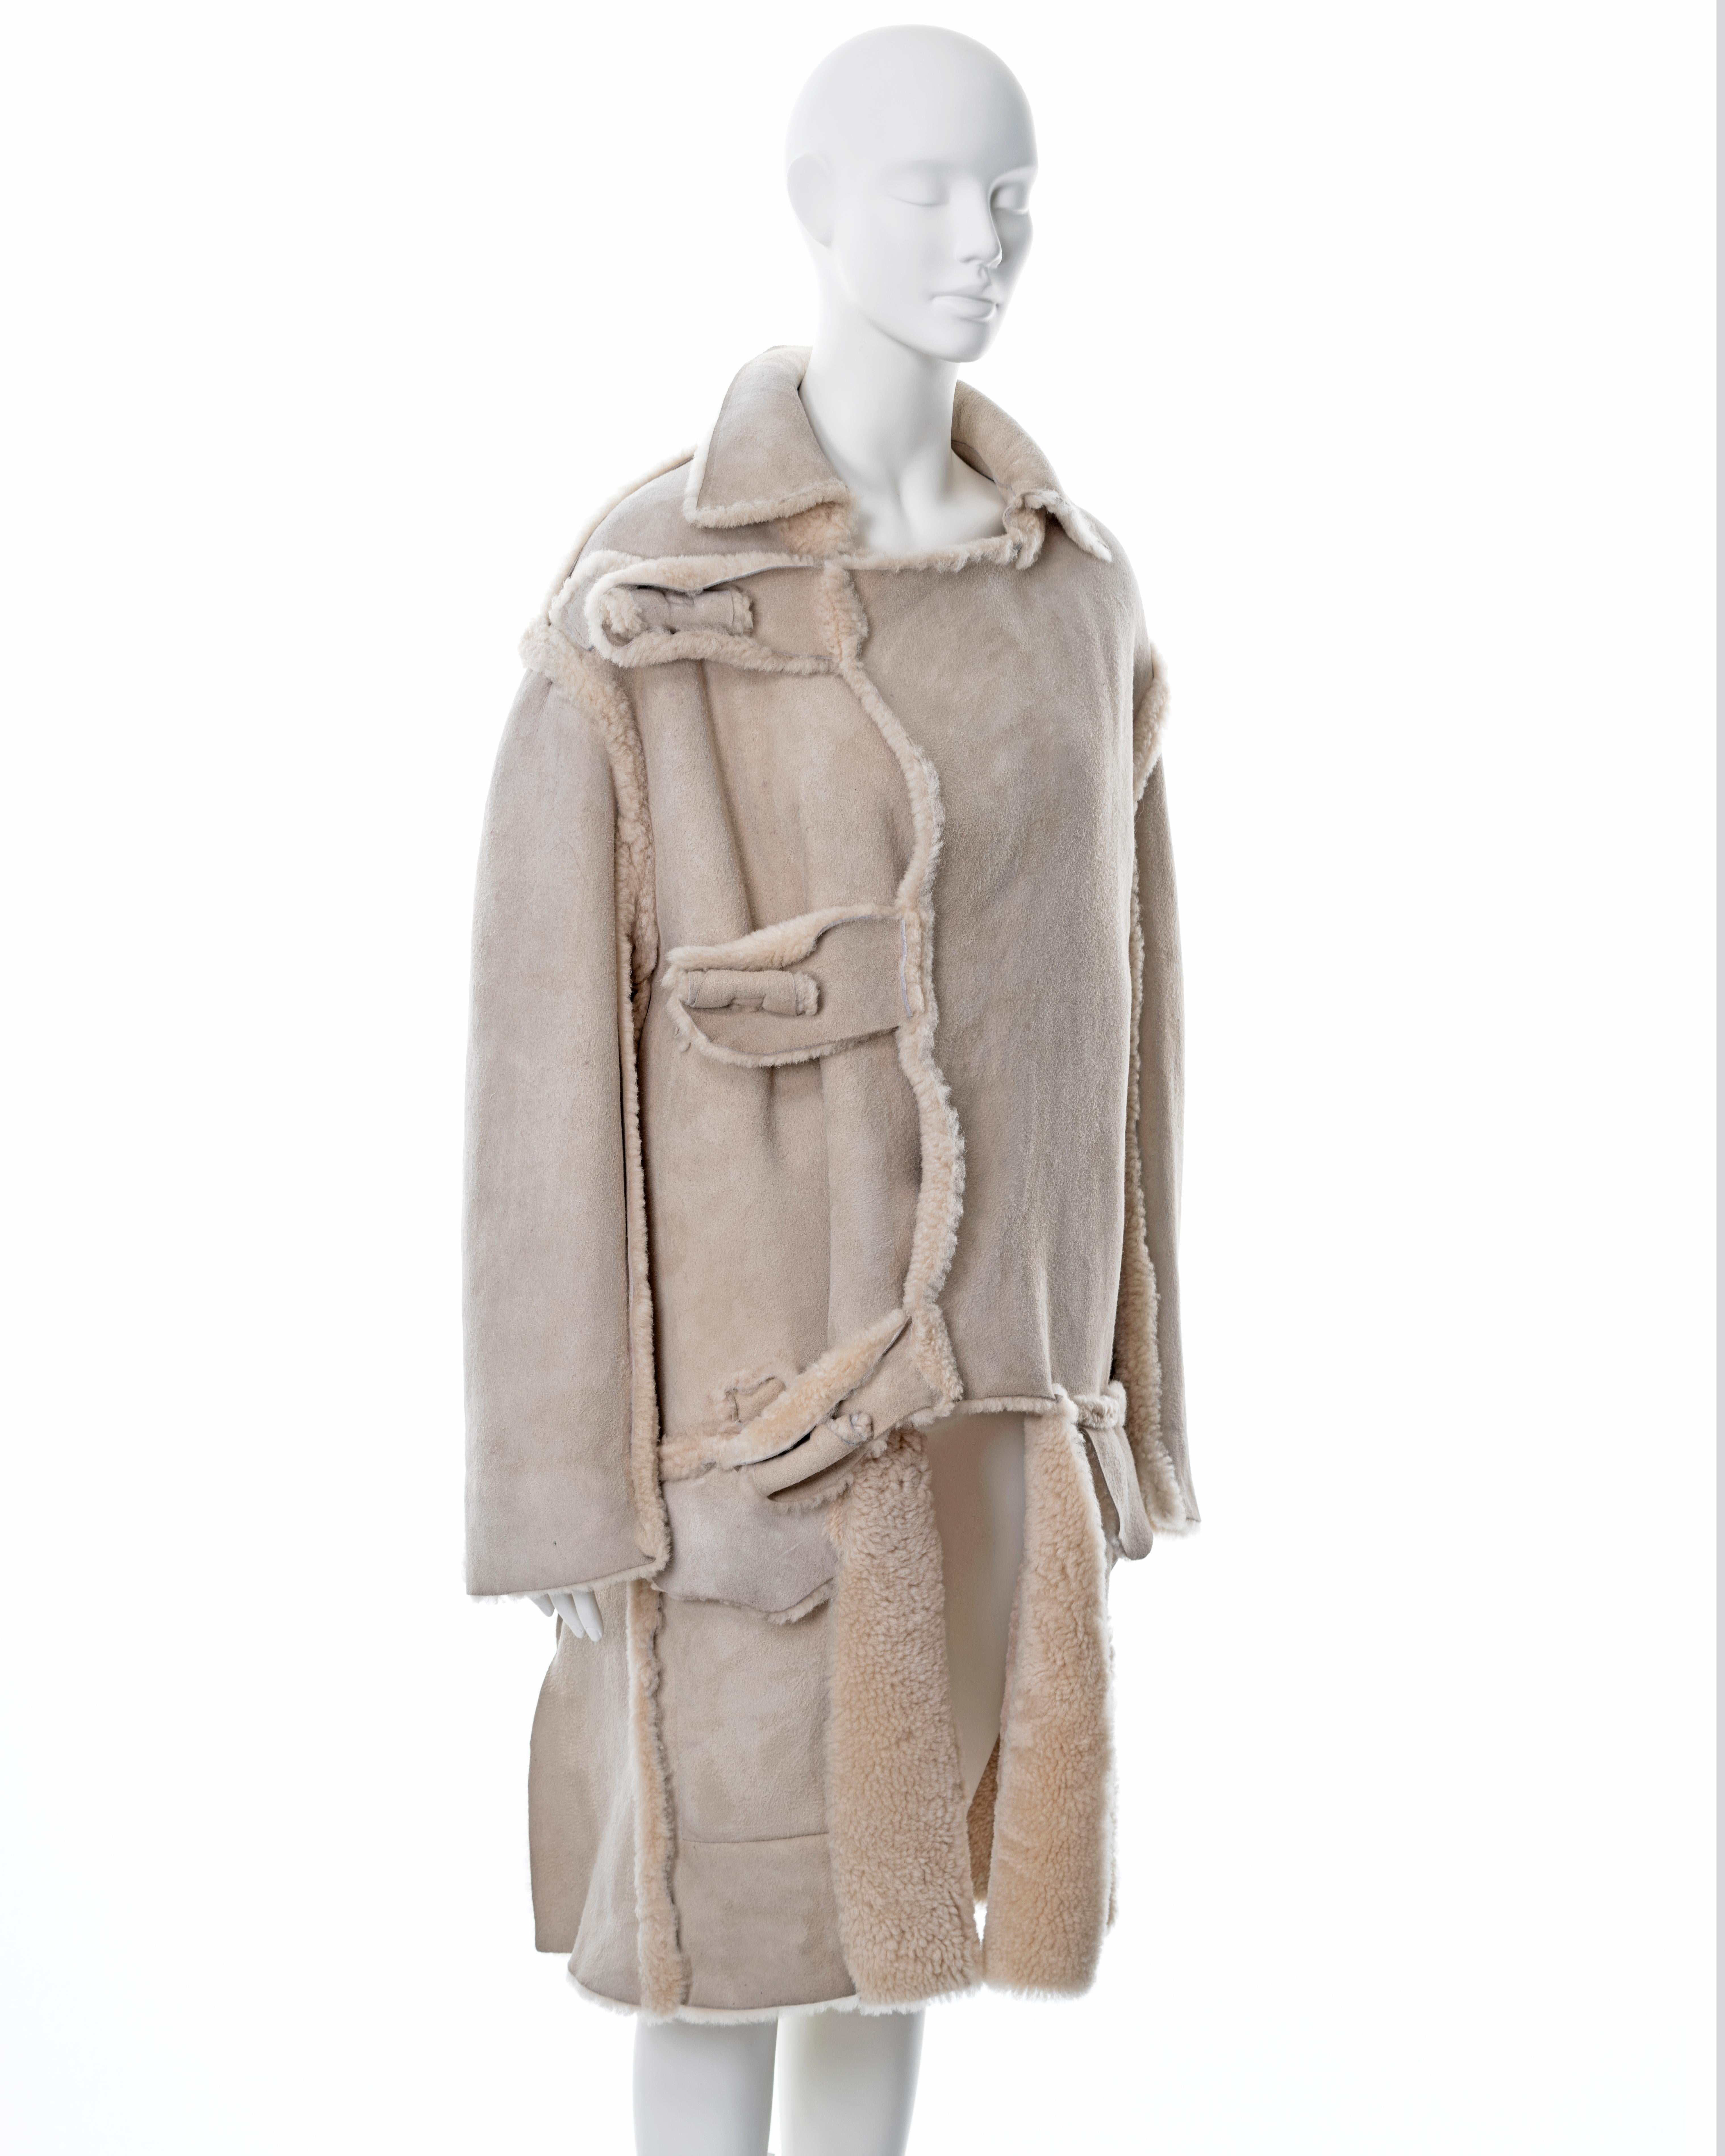 Worlds End by Vivienne Westwood and Malcolm McLaren 'Buffalo' coat, fw 1982 For Sale 4